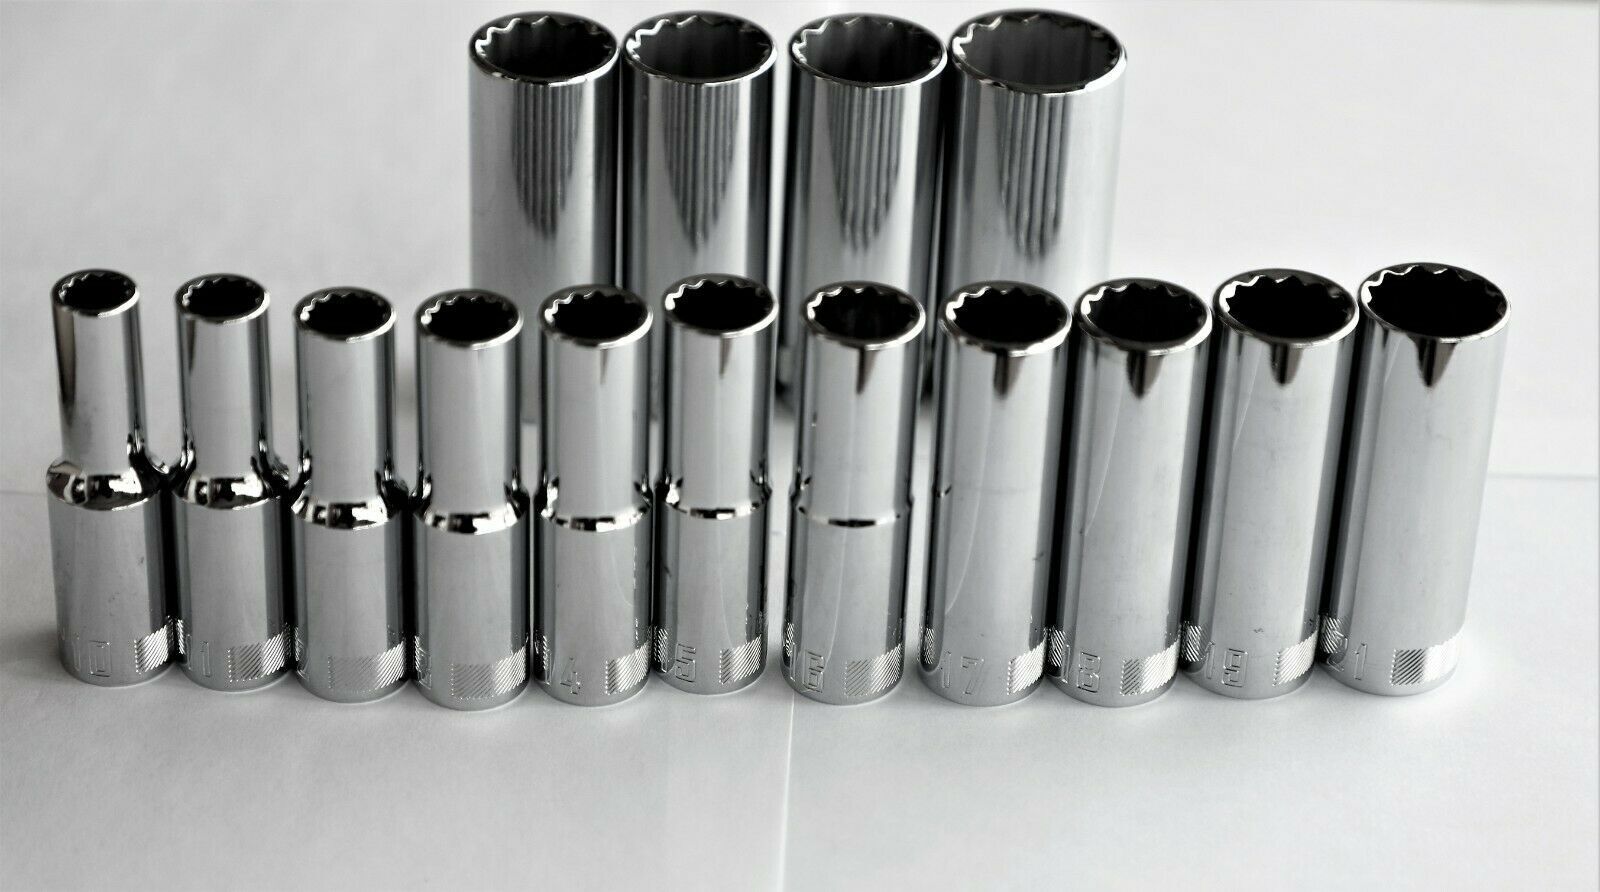 Craftsman 1/2in. Drive 12 point Deep and Stand. SAE/ Metric Socket Set - Choose